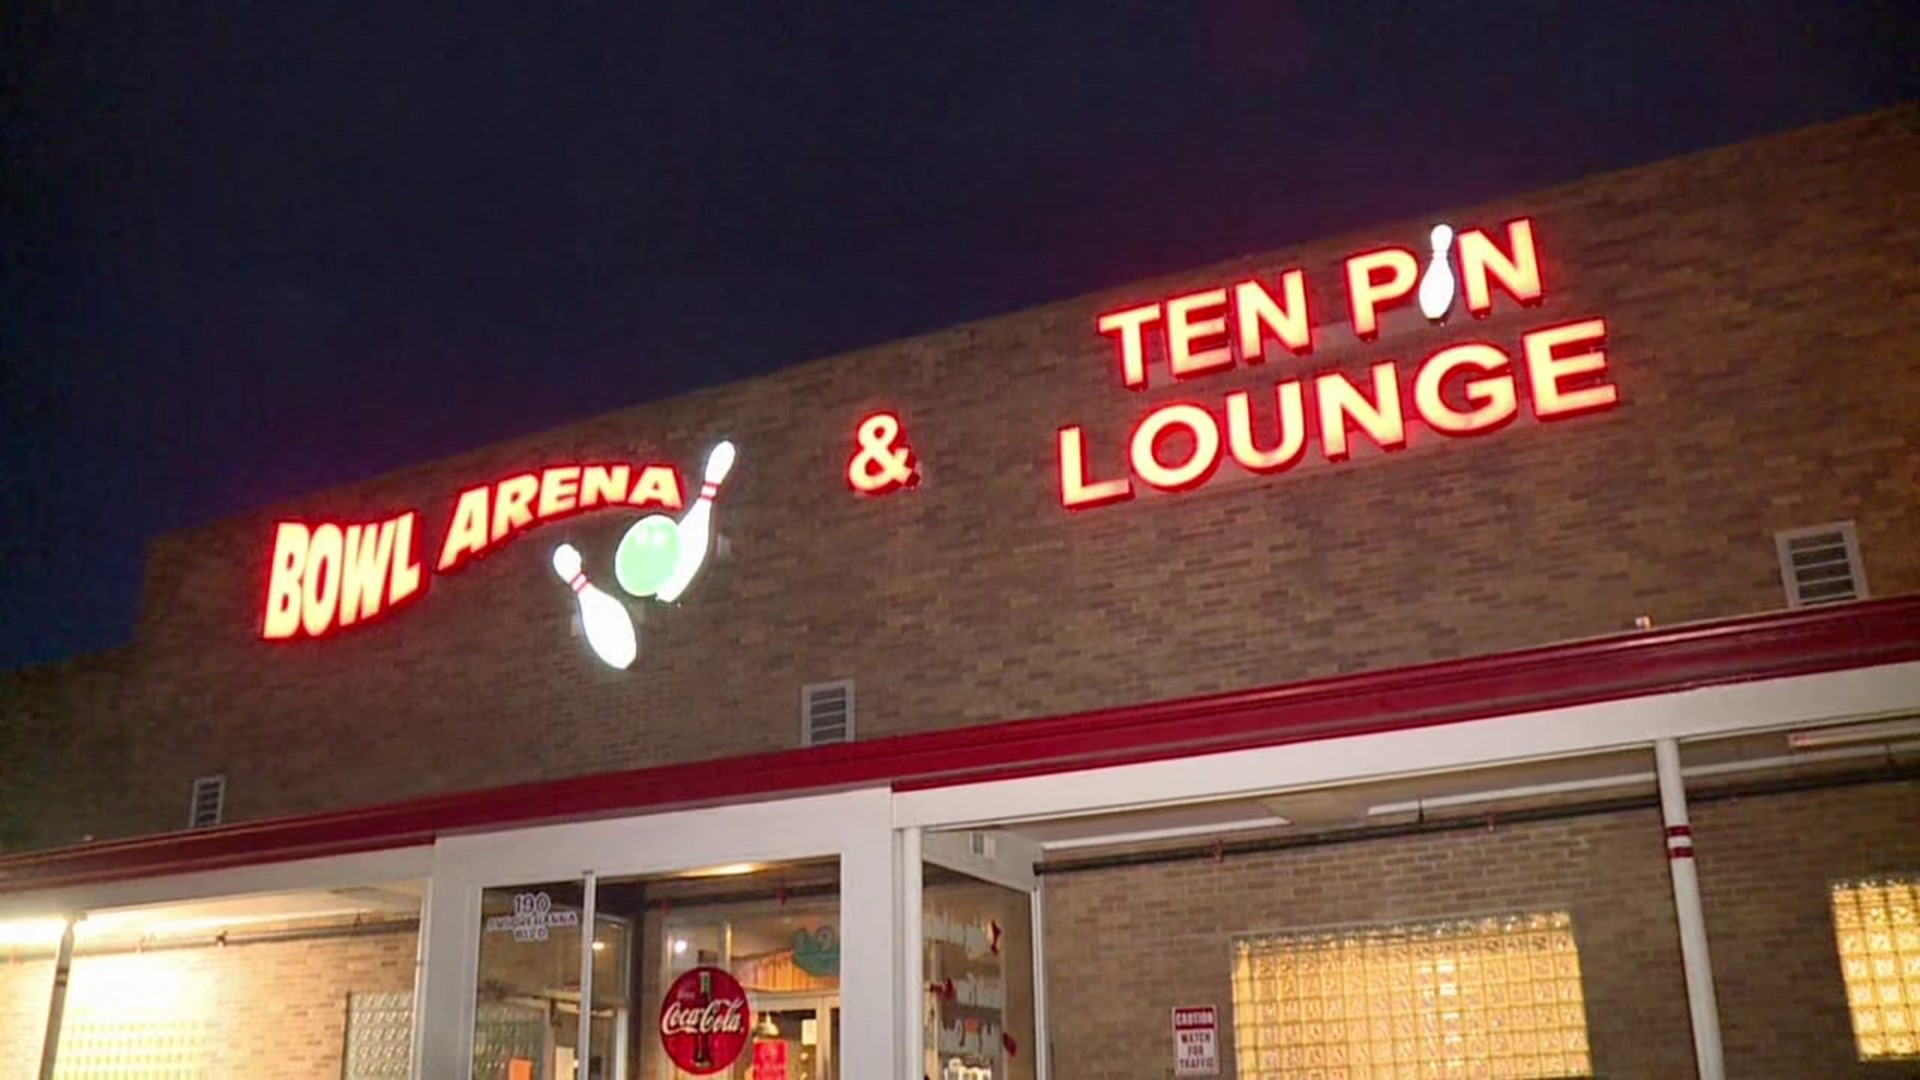 The bowling alley that first opened in 1959 bid farewell to its patrons Saturday with a day full of bowling festivities.